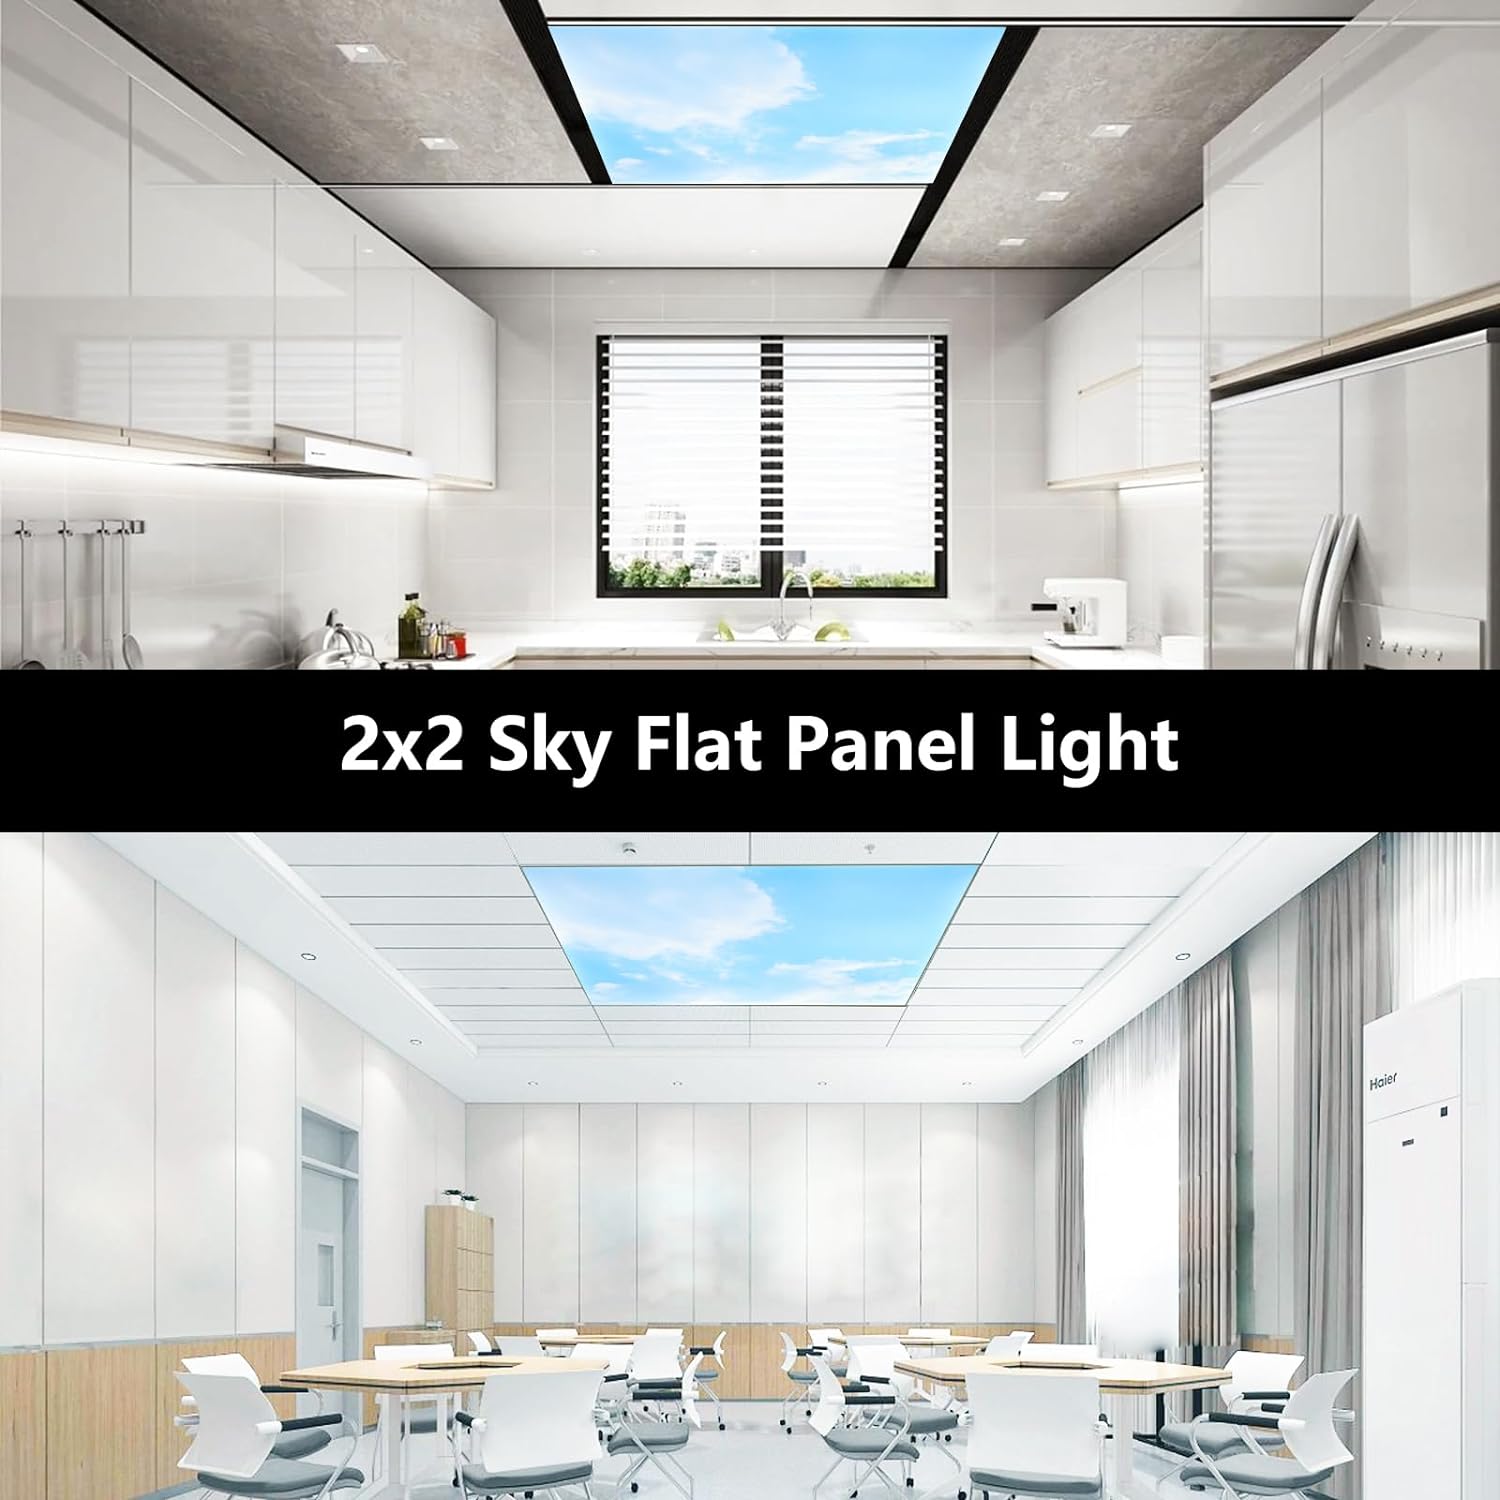 2x2 LED Cloud Ceiling Panel - Selectable Wattage (40W/30W/20W) & CCT (3000K/4000K/5000K), 0-10v Dimmable, ETL Certified - Eco LED Lightings 